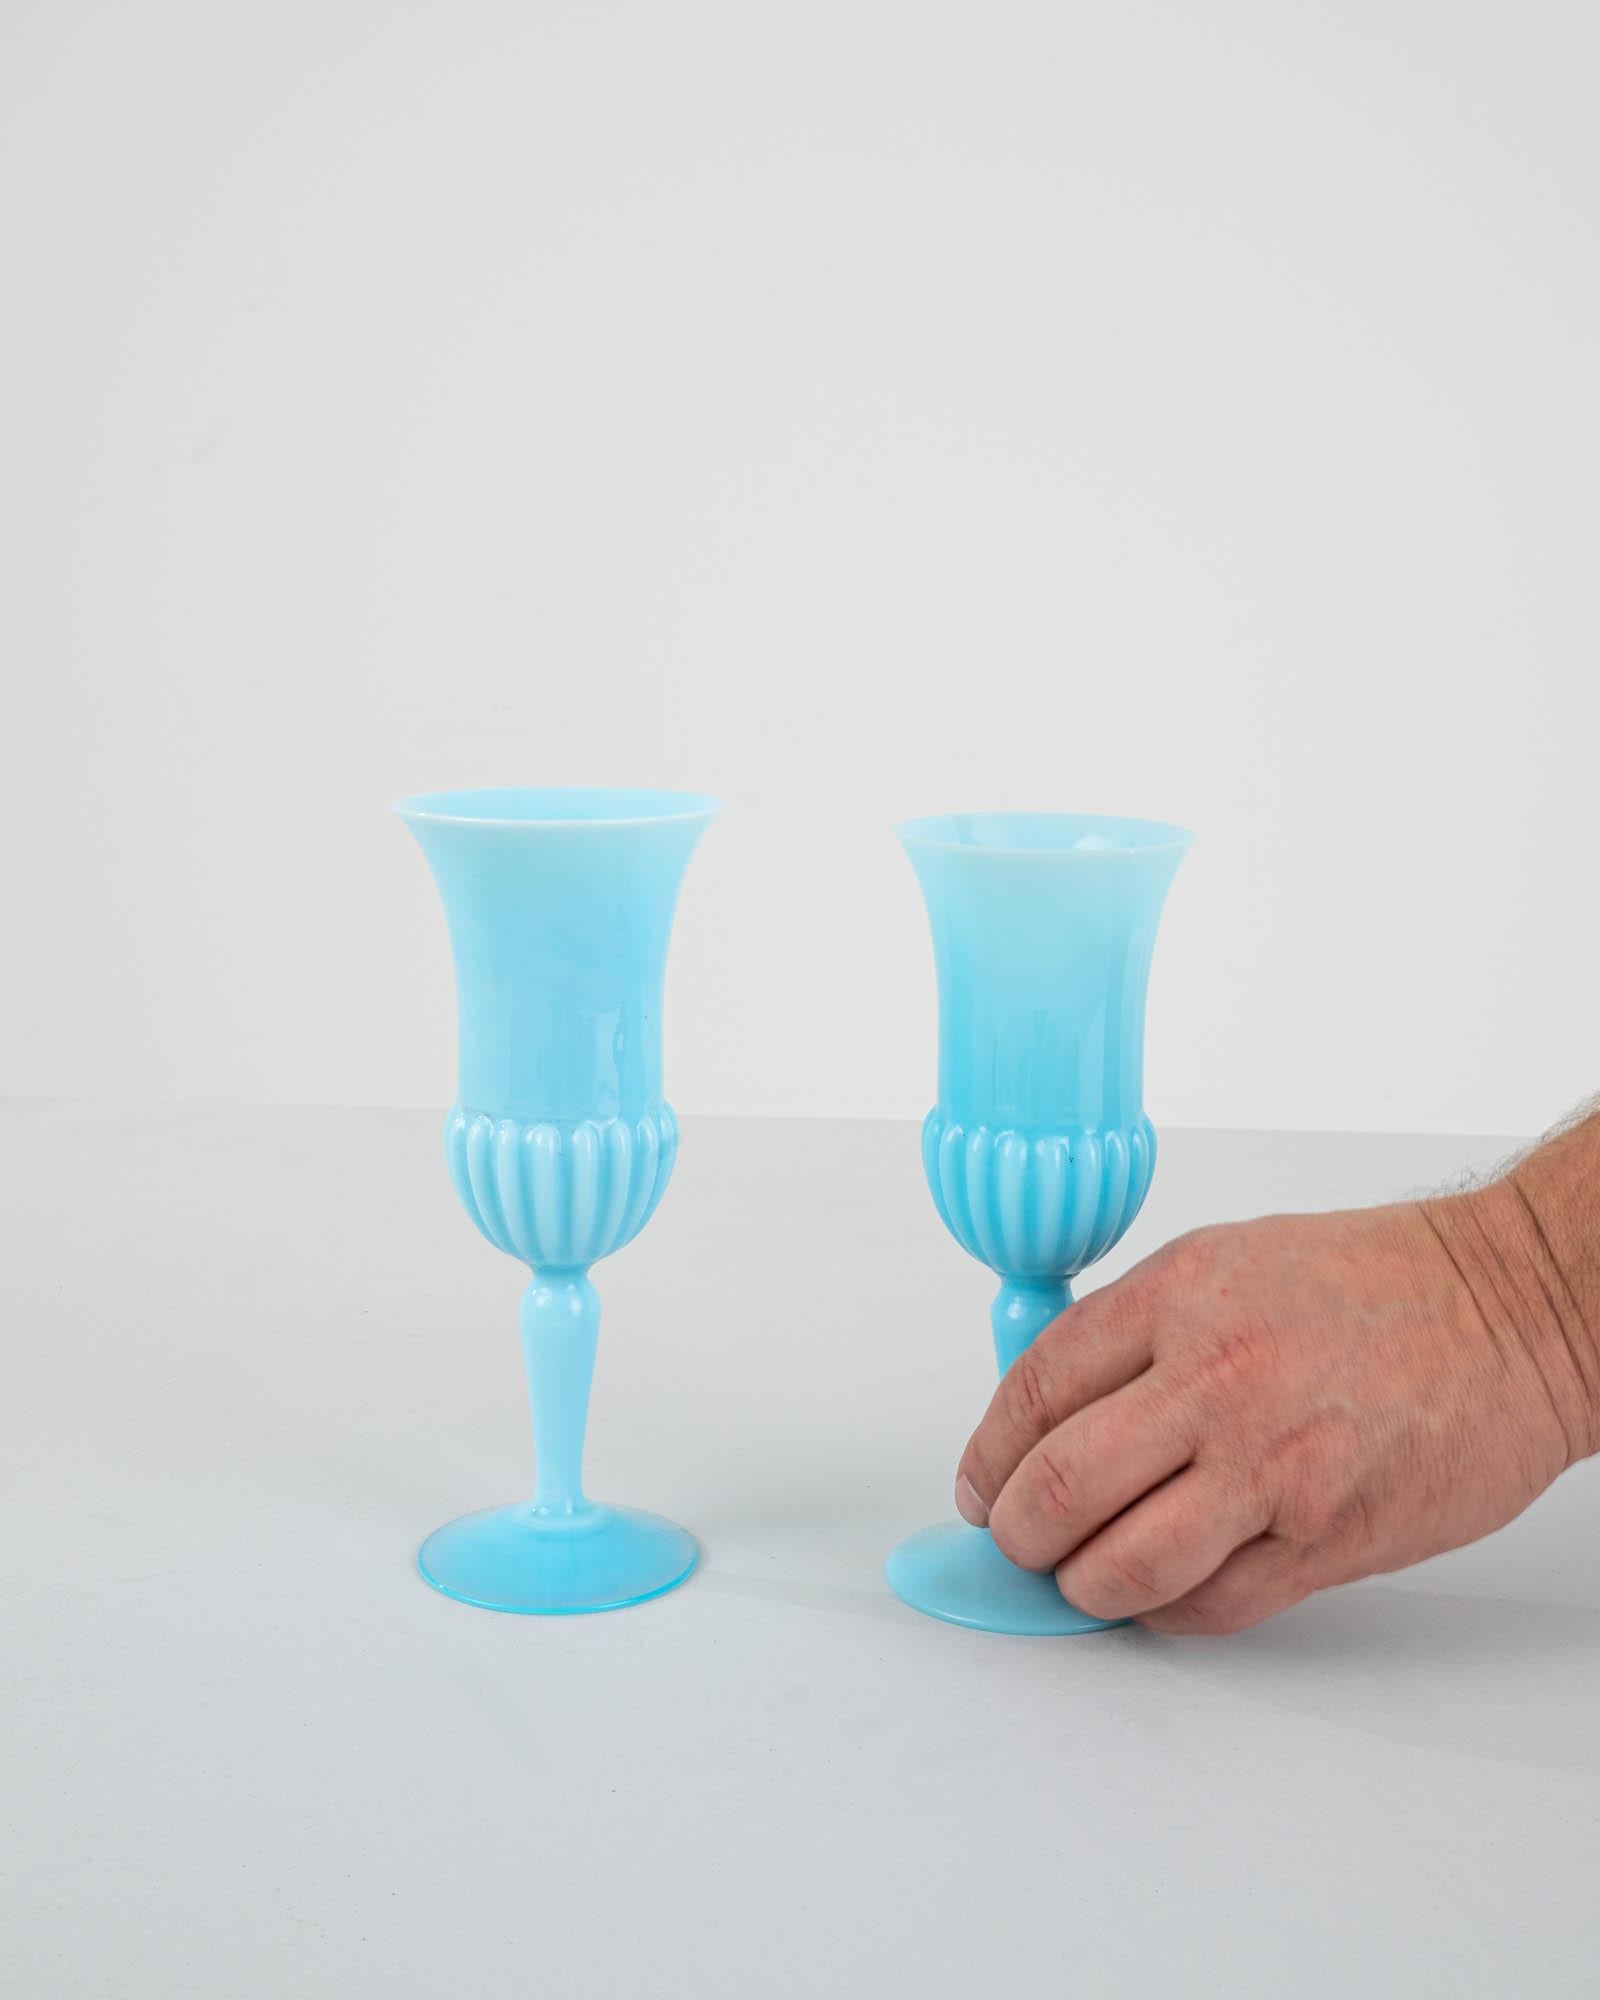 Exquisite in design, this set of two 20th-century Italian blue glass vases is a testament to elegance. The enchanting ice blue hue captivates the eye, creating a soothing and timeless aesthetic. The vases gracefully flare outward at the top, adding